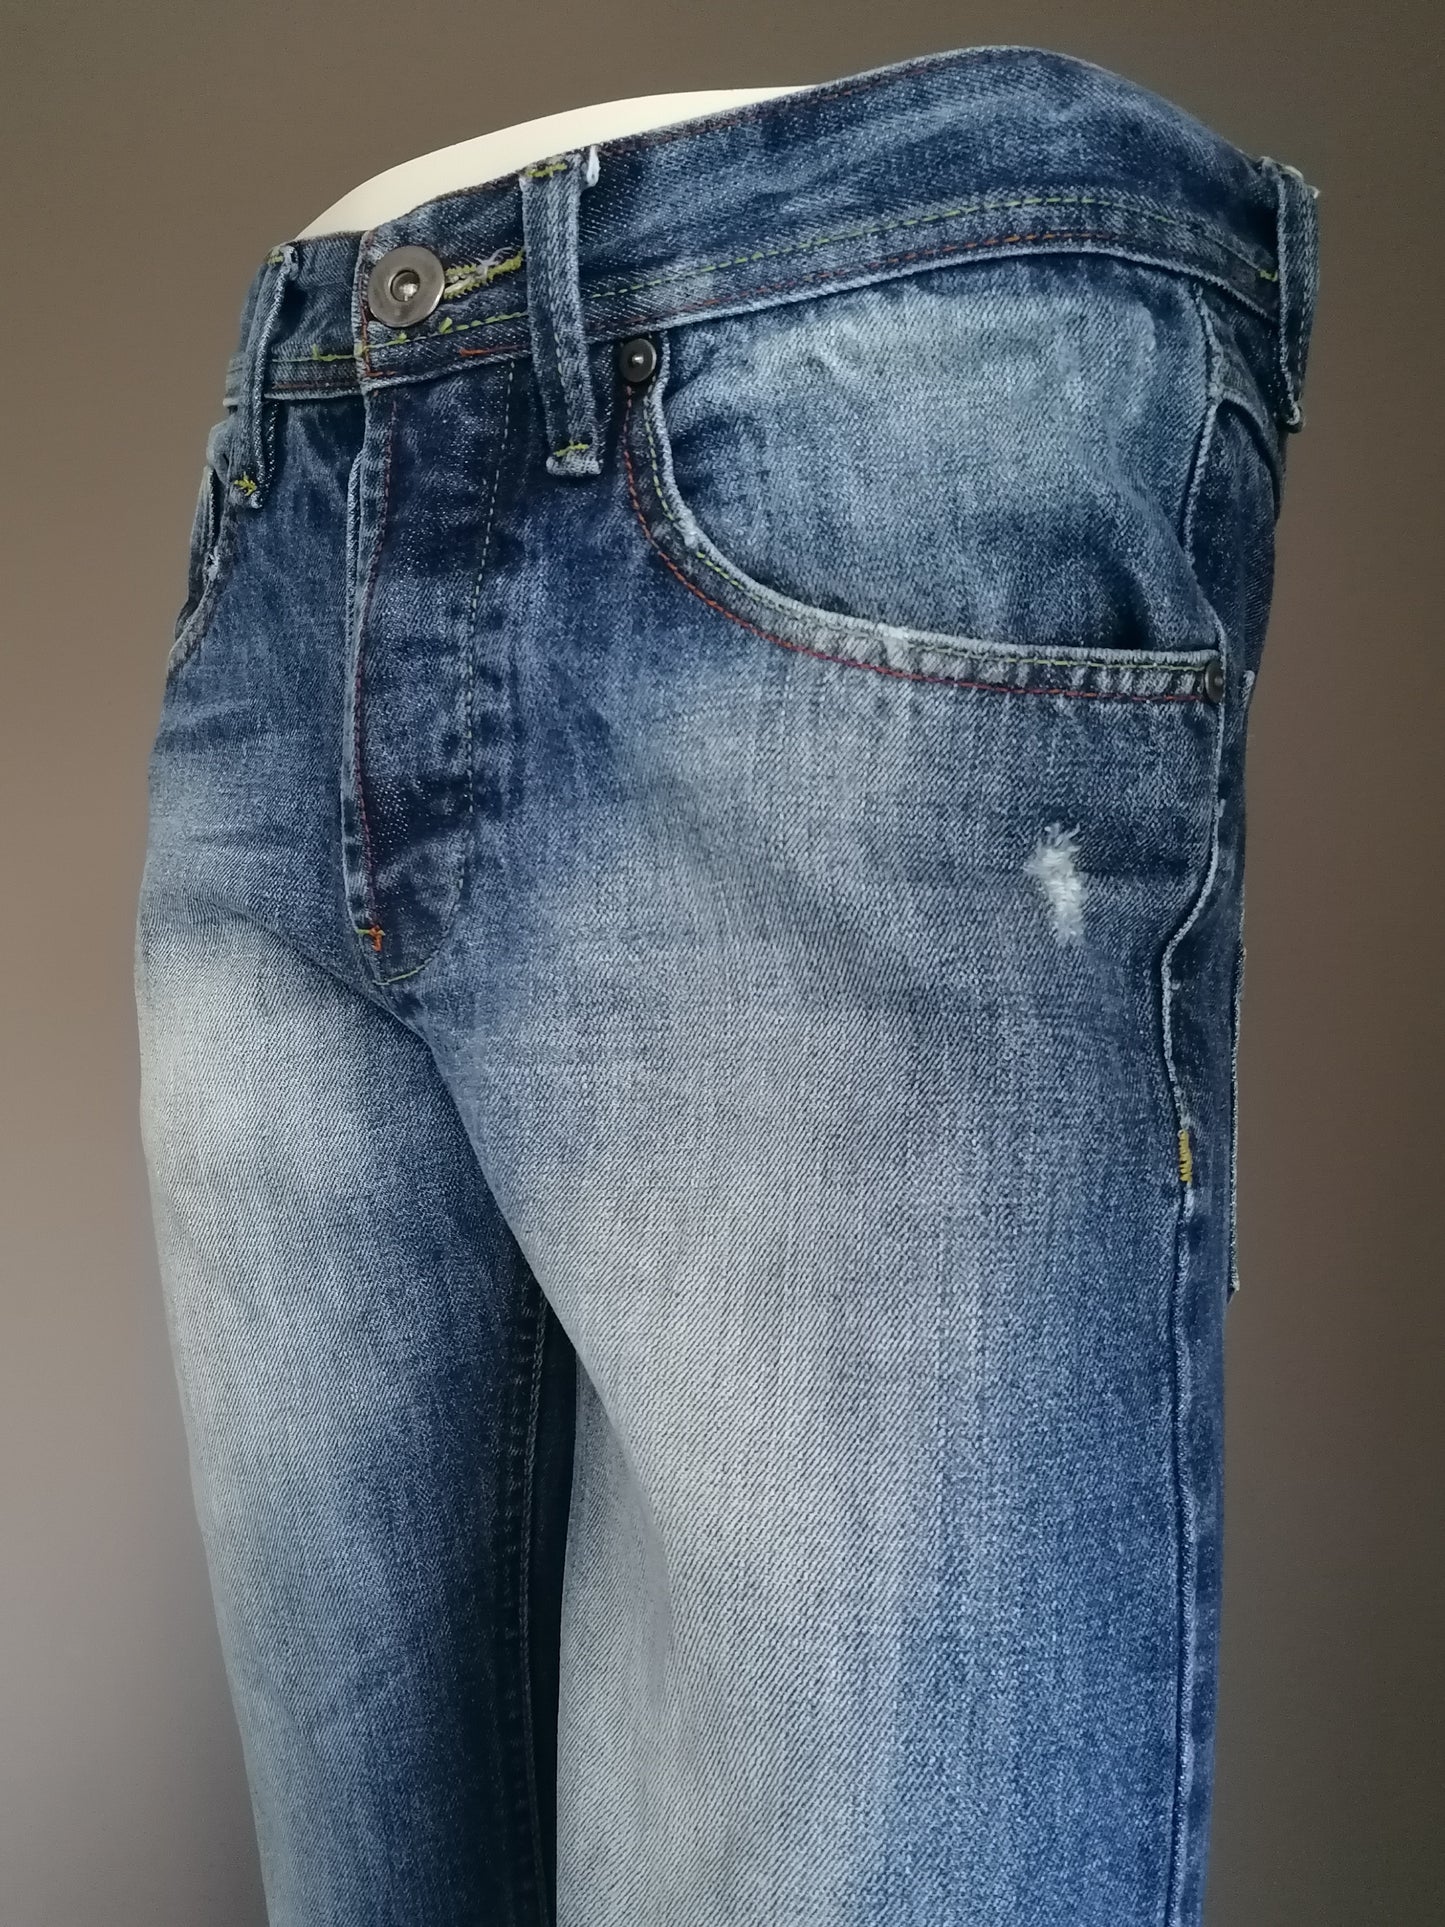 Jeans New Look. Couleur bleue. Taille W30 - L30. Jambe droite.